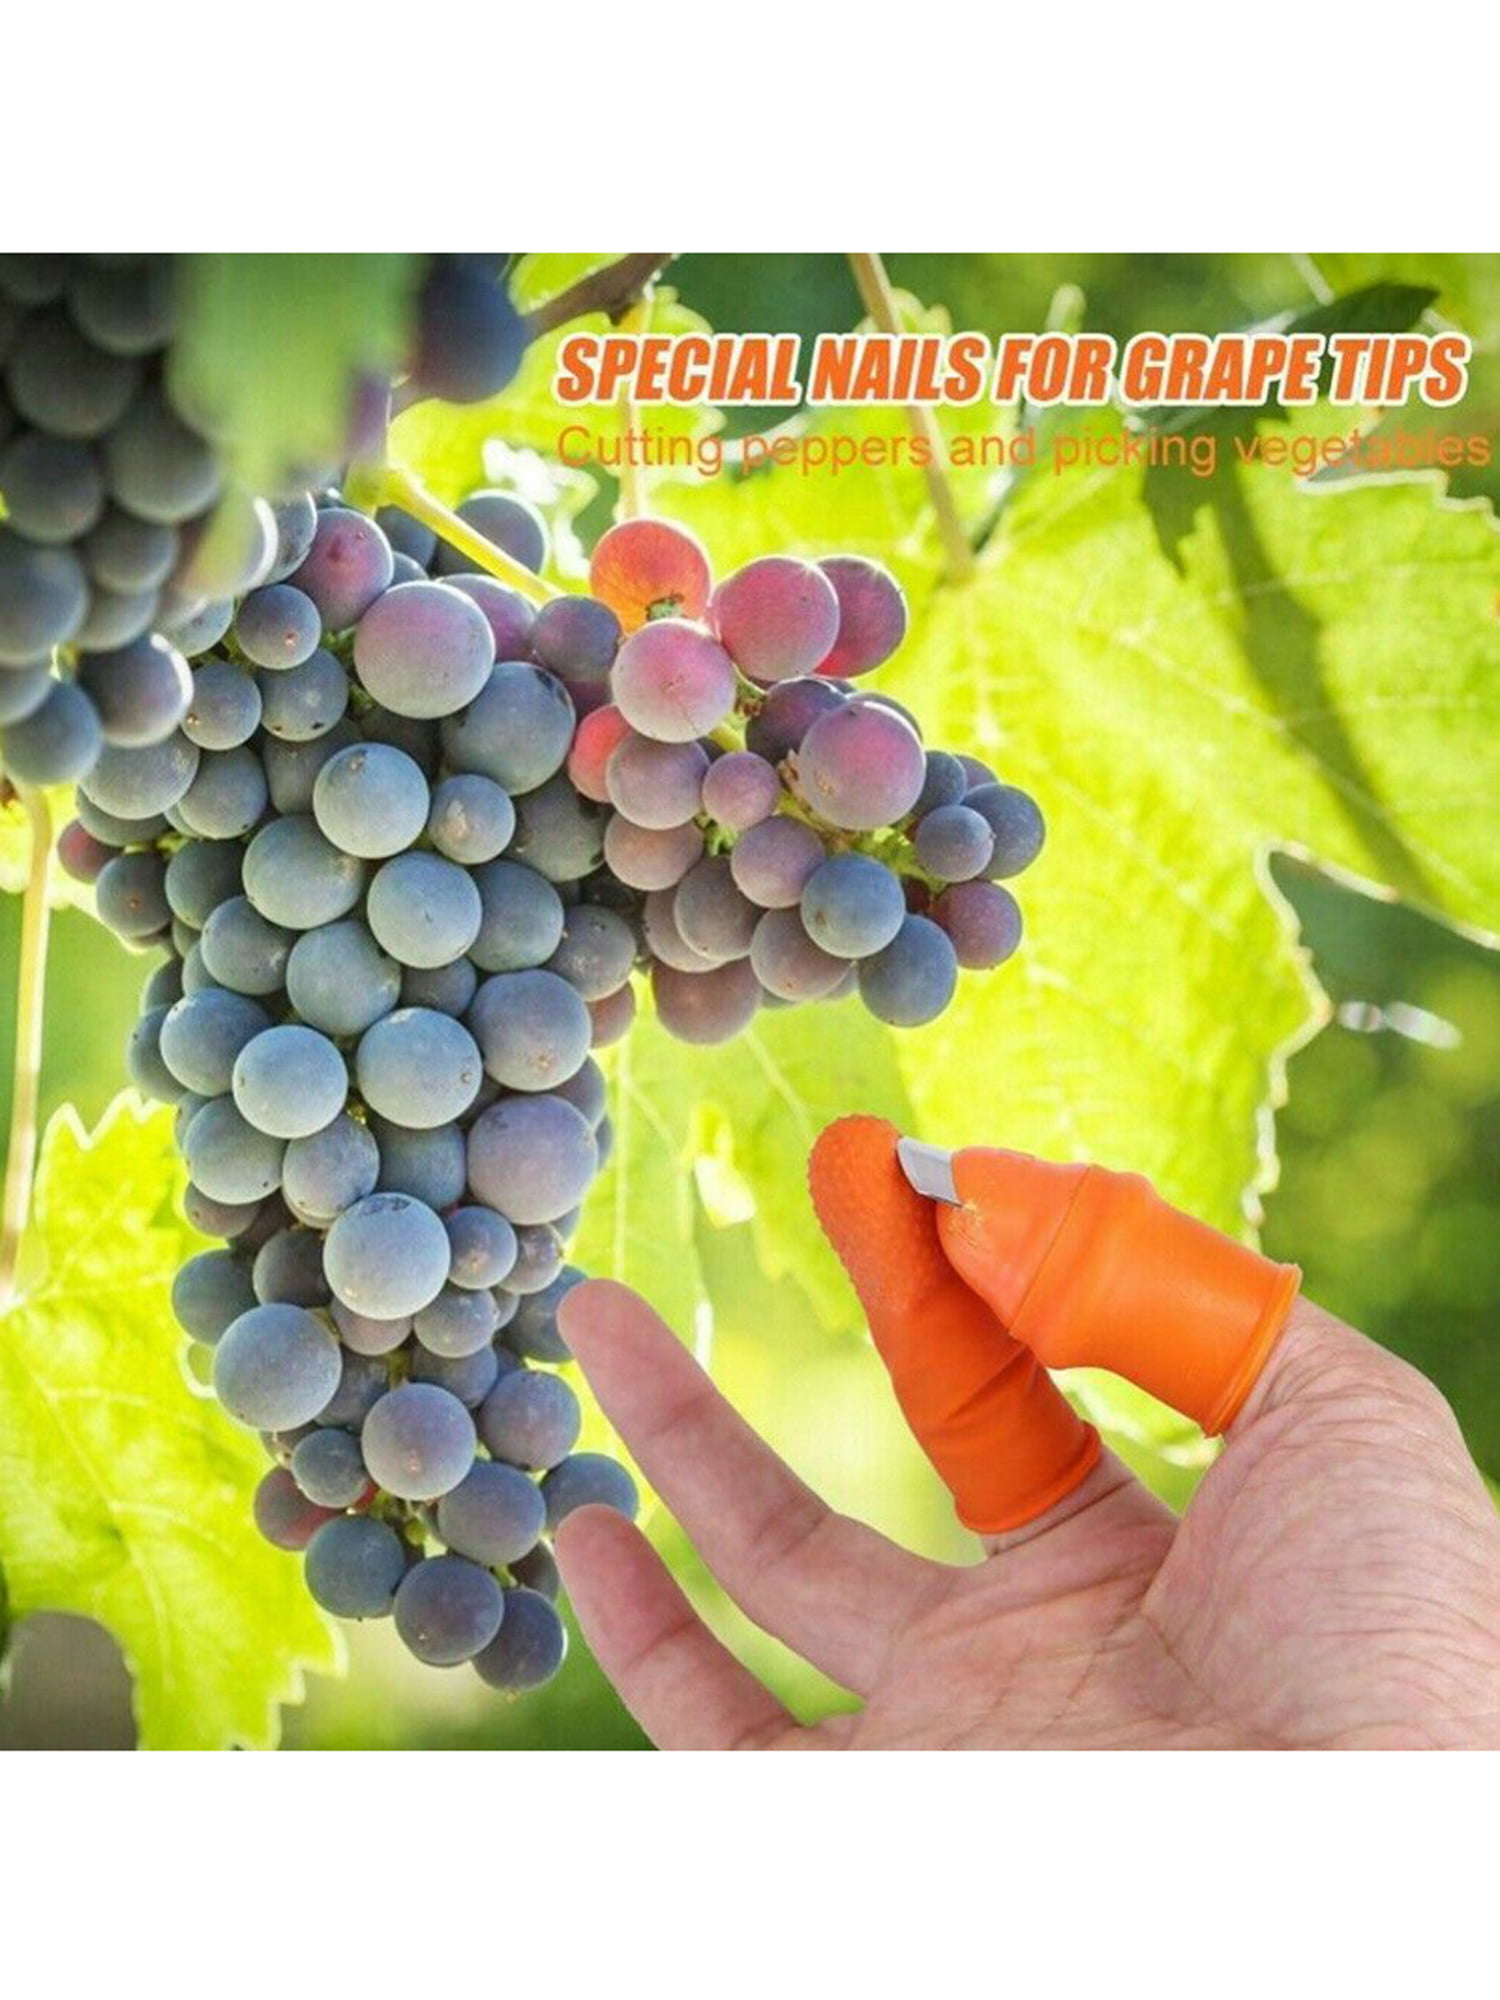 New Agricultural Pluck Device Finger Thumb Cut Vegetable God Cutting tool J7Q9 